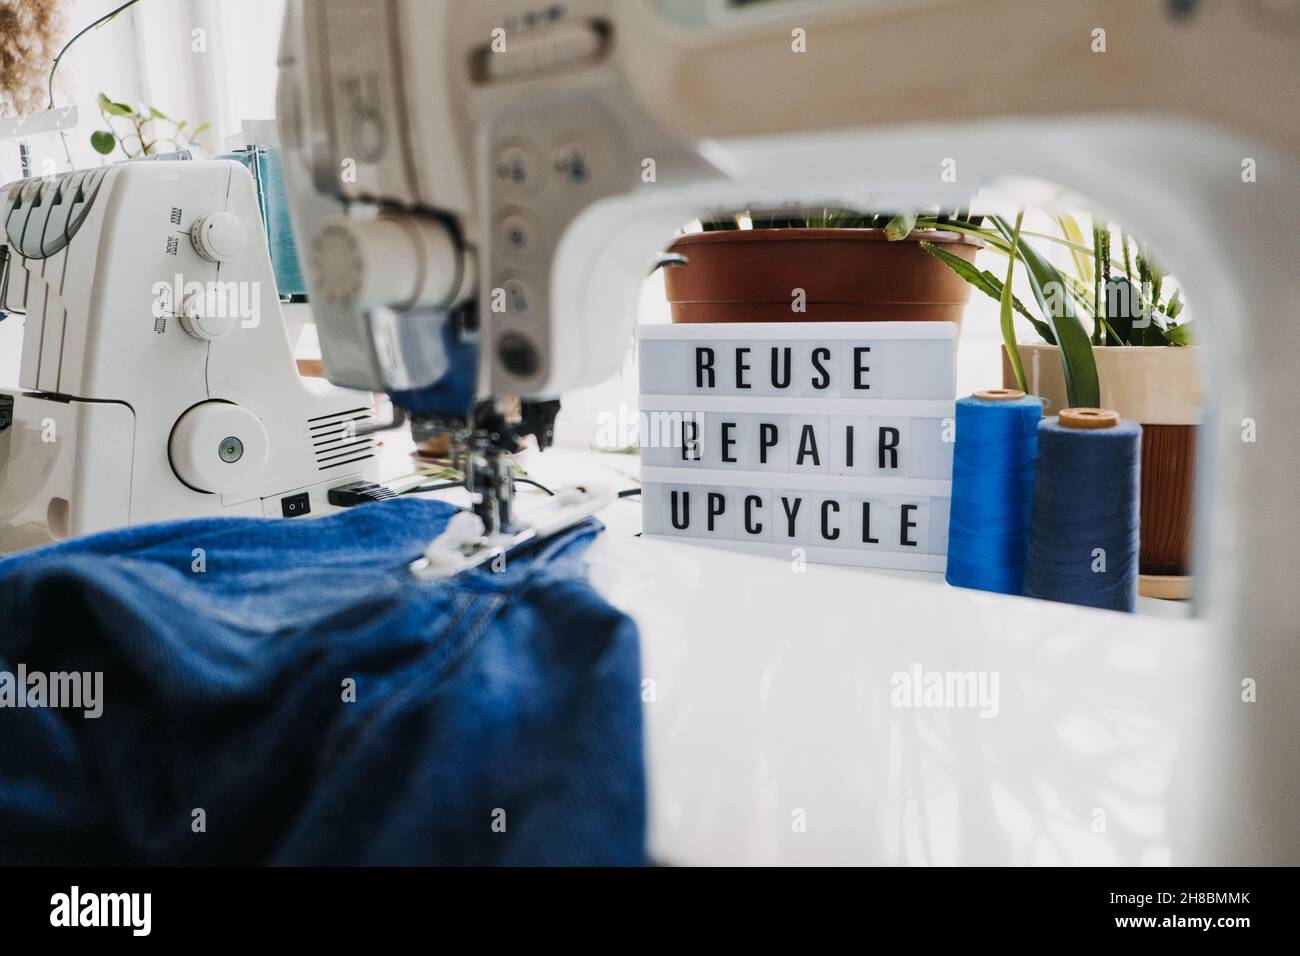 Reuse, repair, upcycle text on light board on sewing machines background. Stack of old jeans, Denim clothes, scissors, thread and sewing tools in Stock Photo